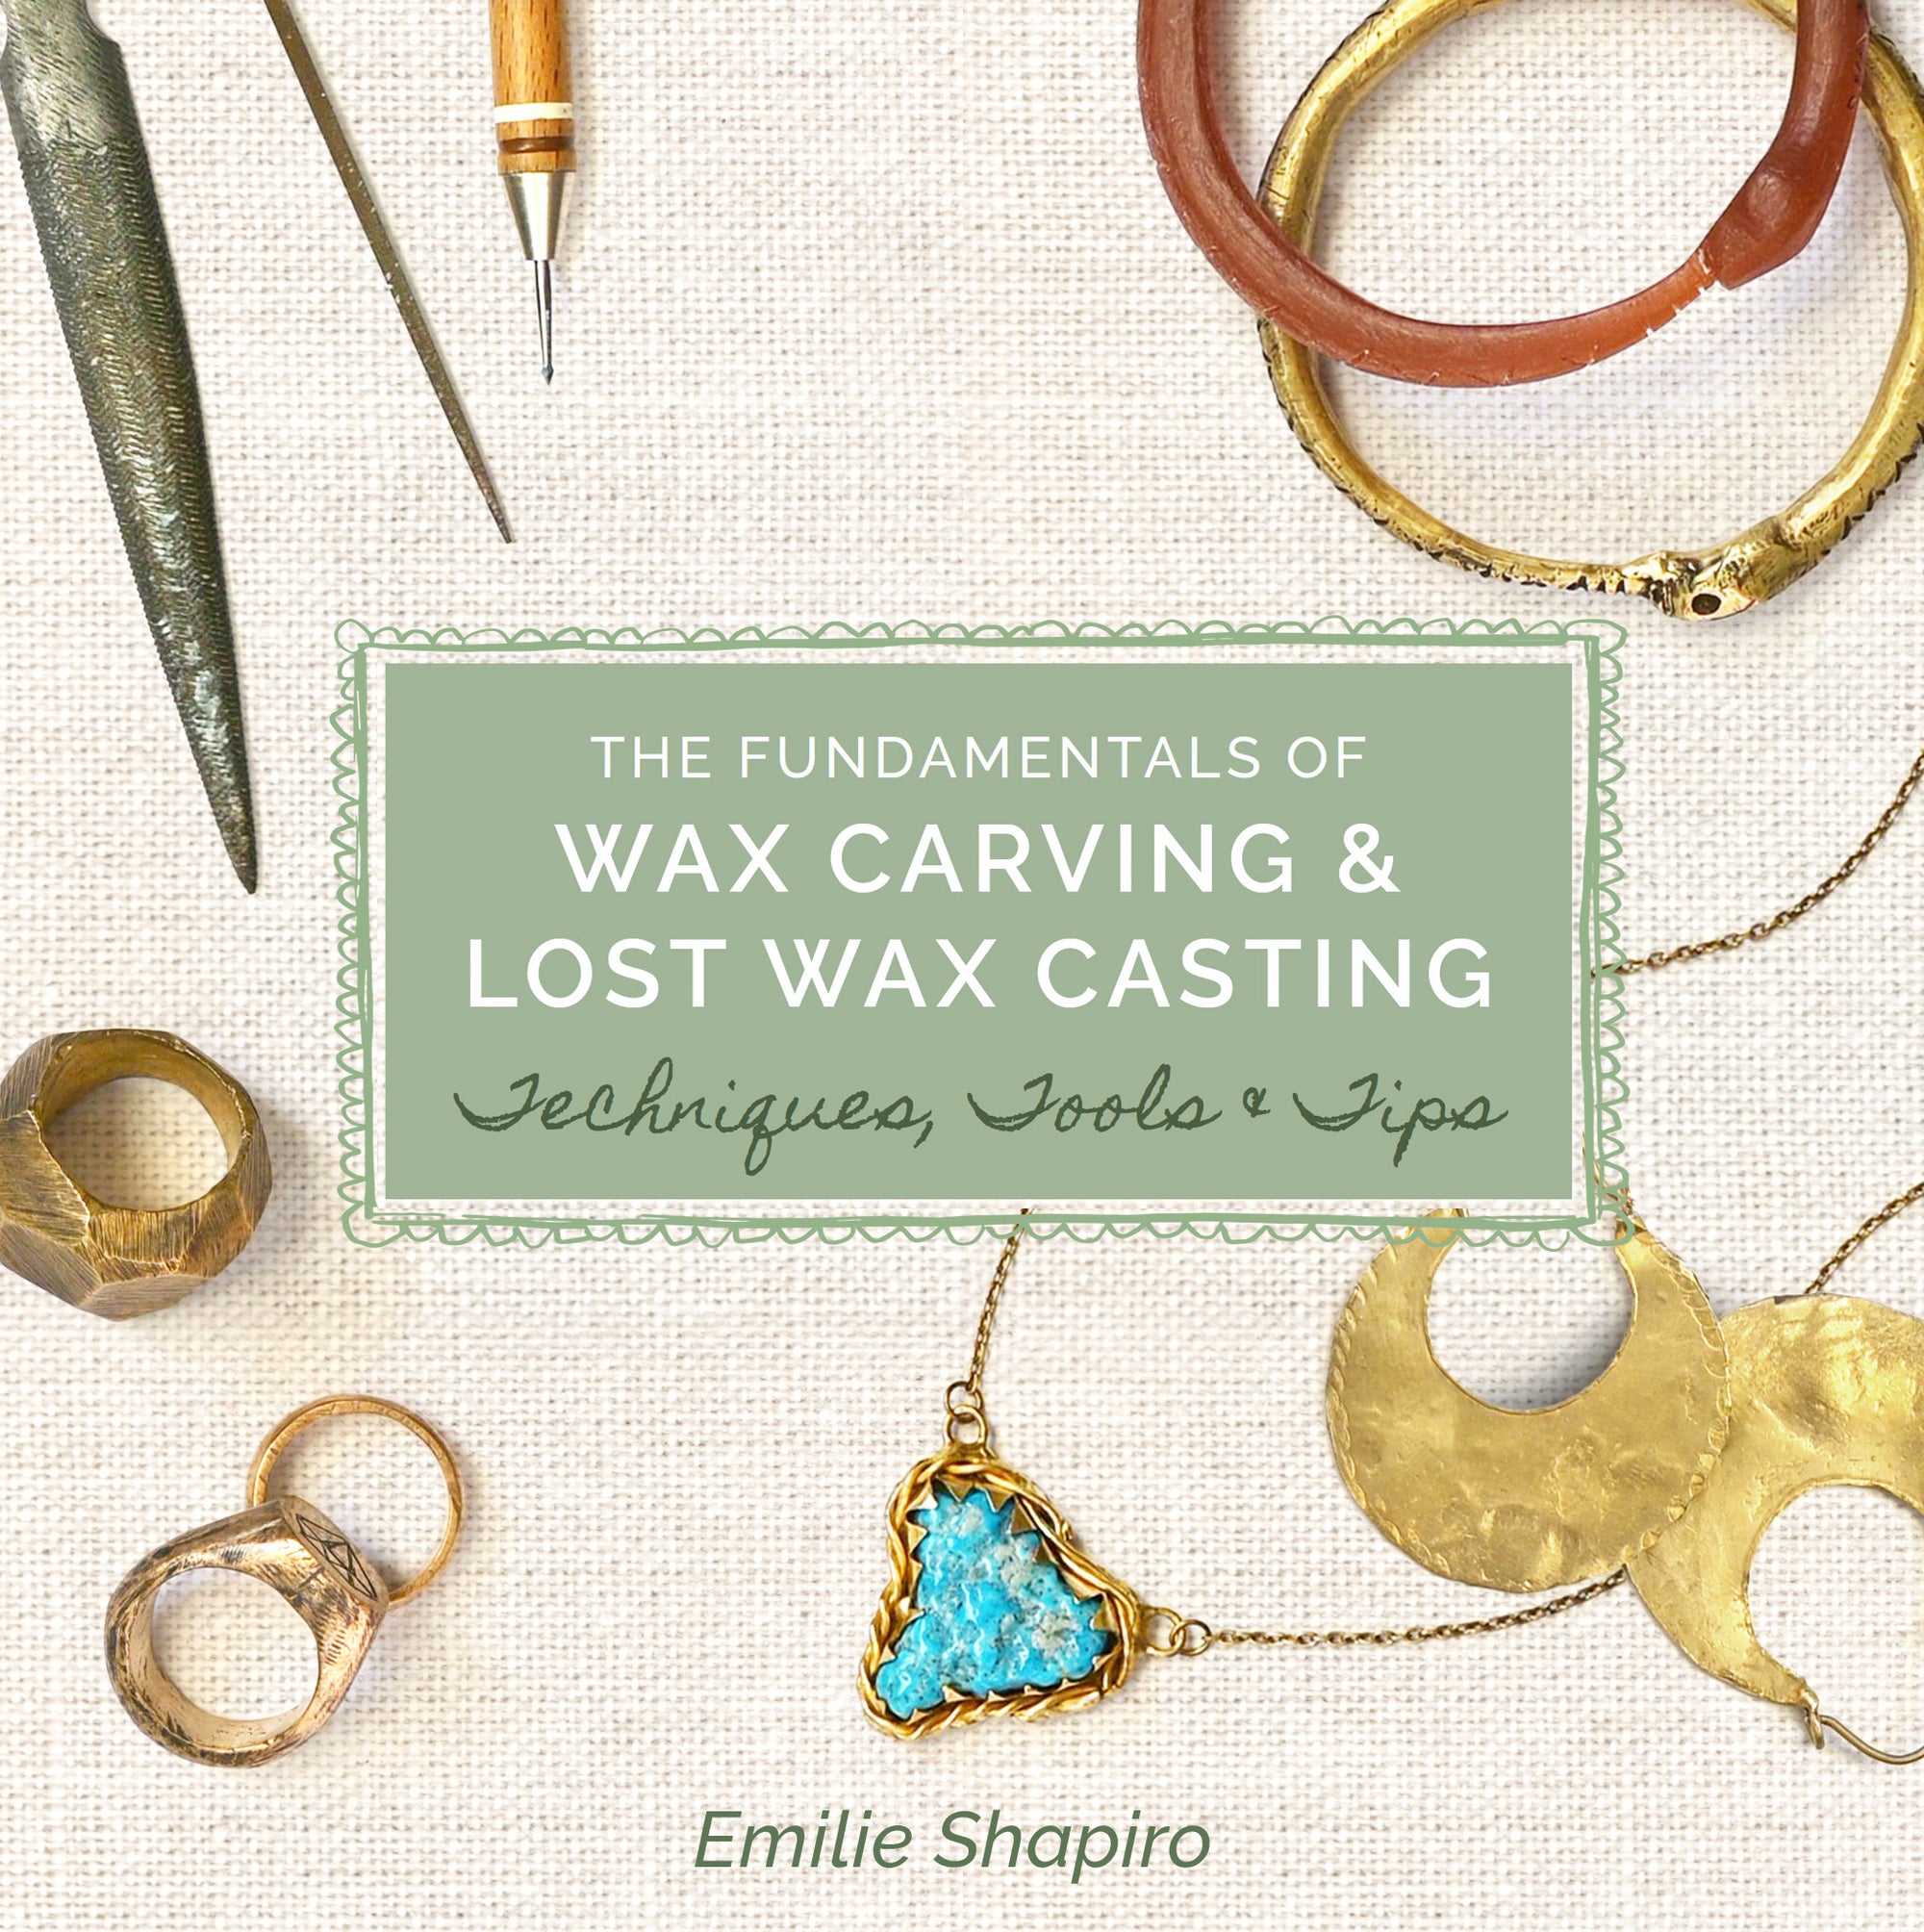 The Fundamentals of Wax Carving & Lost Wax Casting E-Book